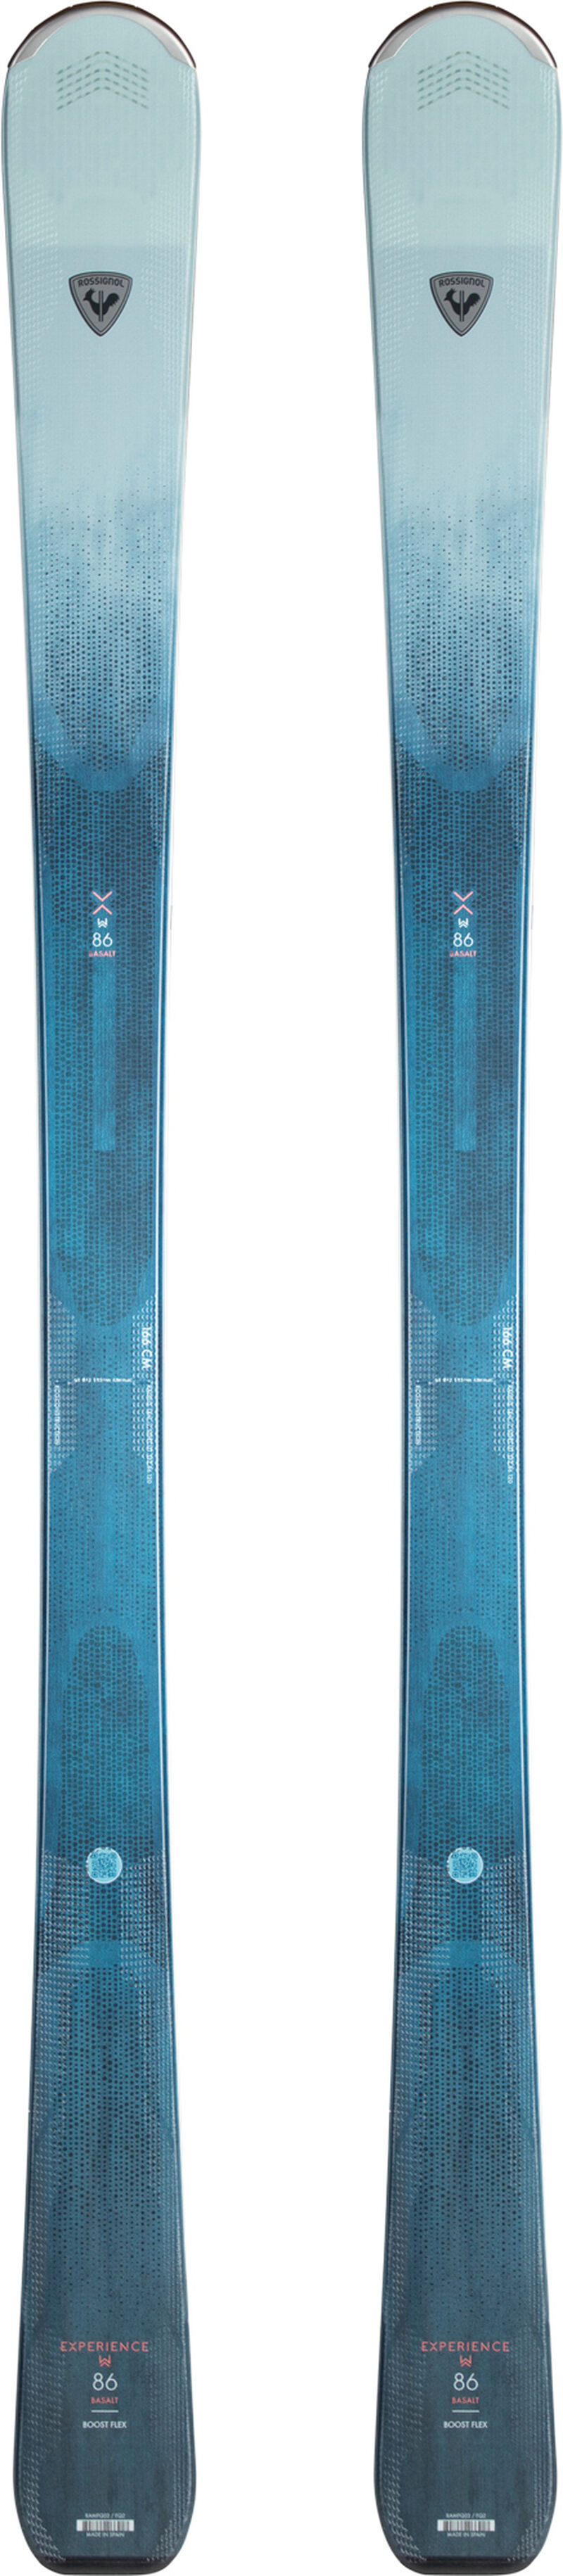 Rossignol Skis All Mountain femme EXPERIENCE W 86 BASALT (OPEN) 